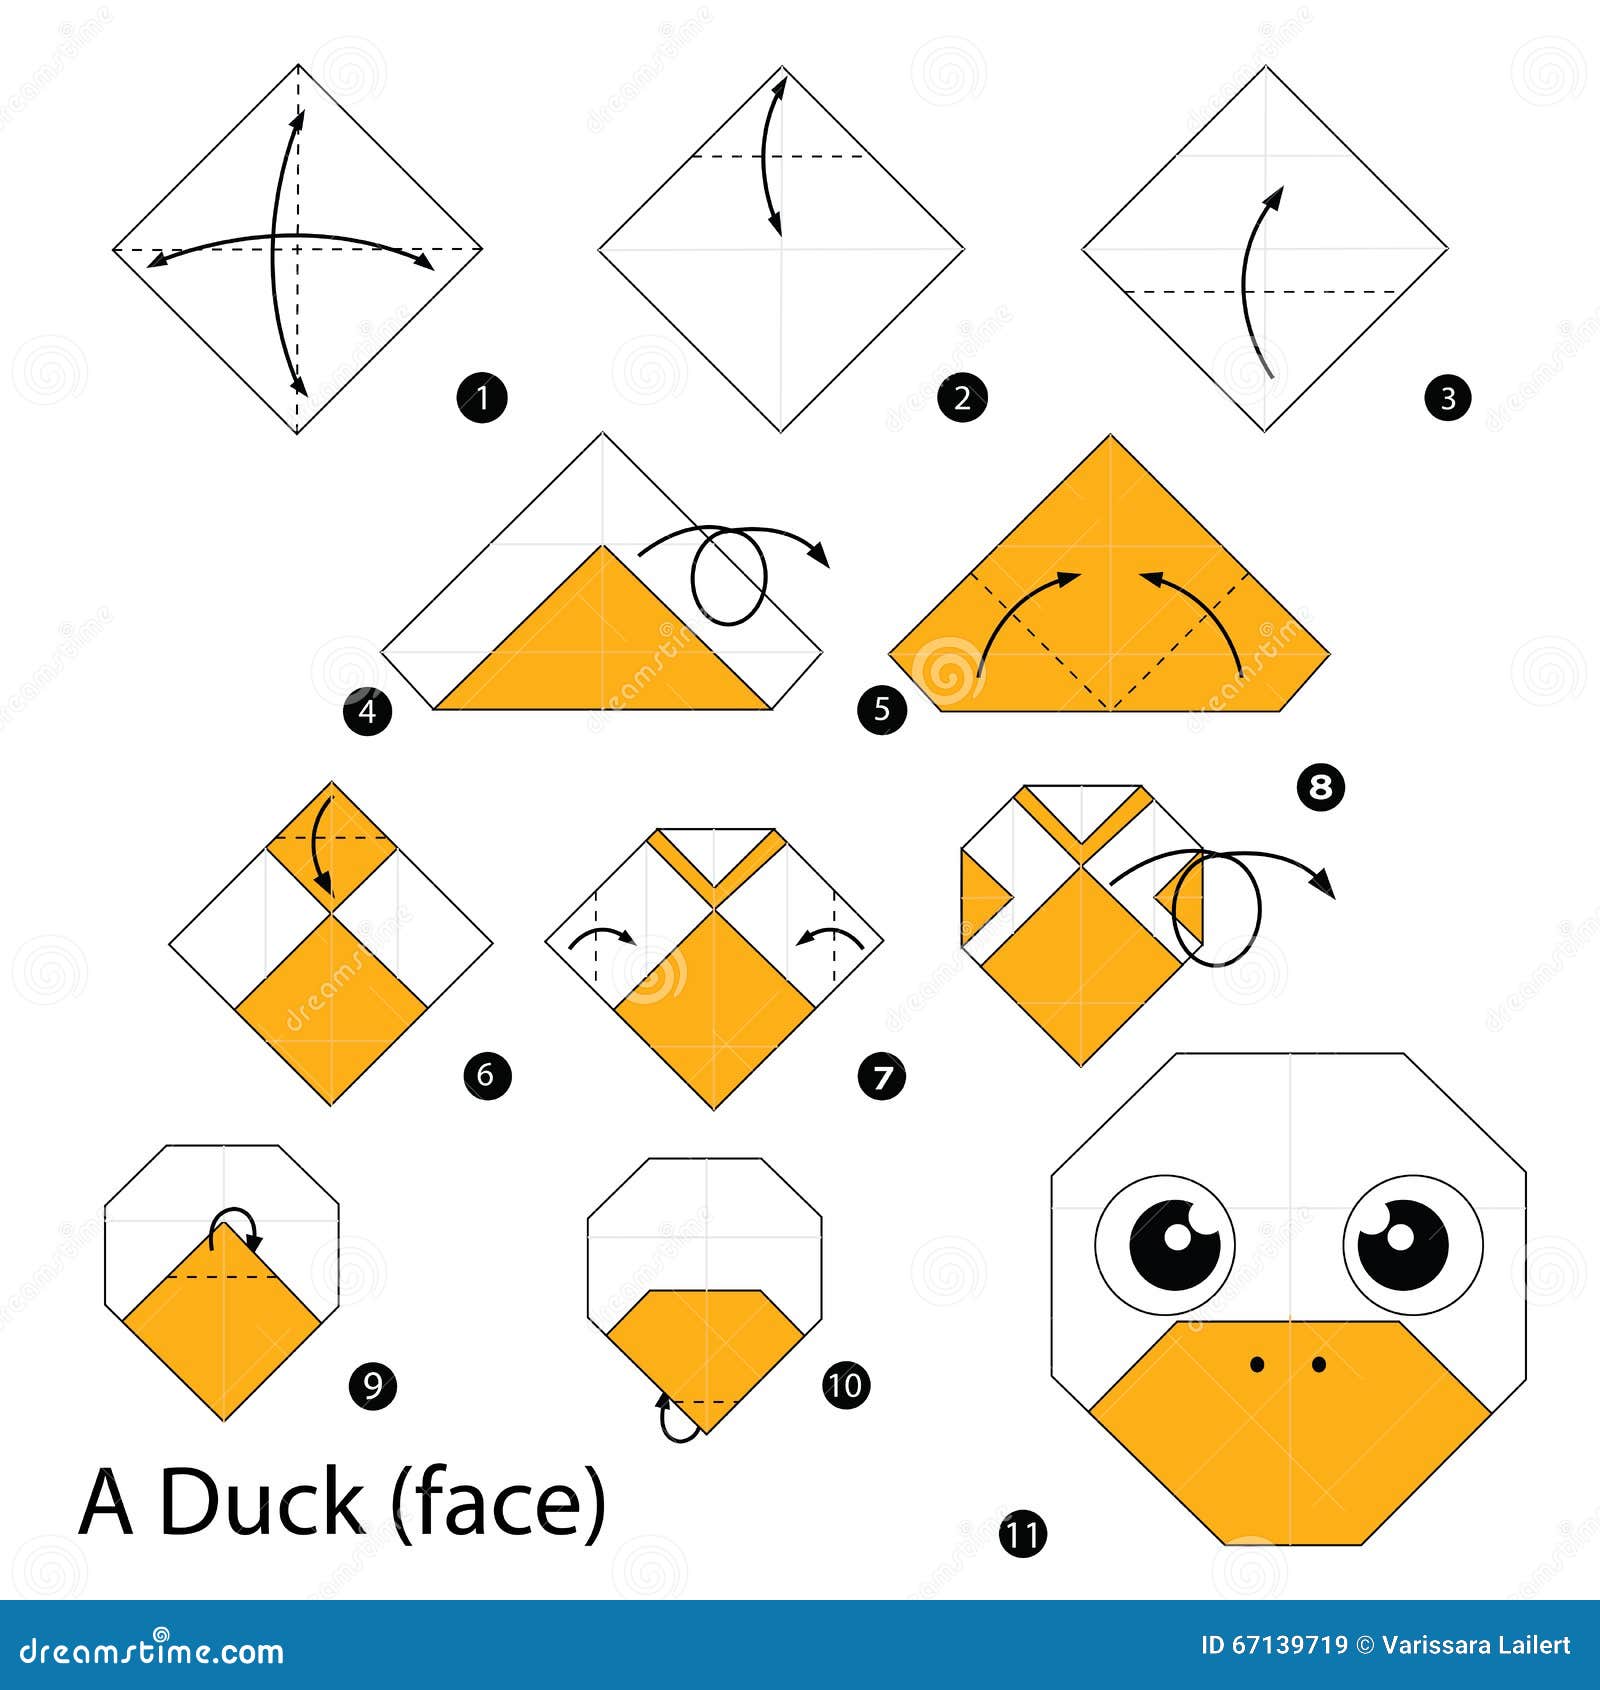 Step By Step Instructions How To Make Origami A Duck (face